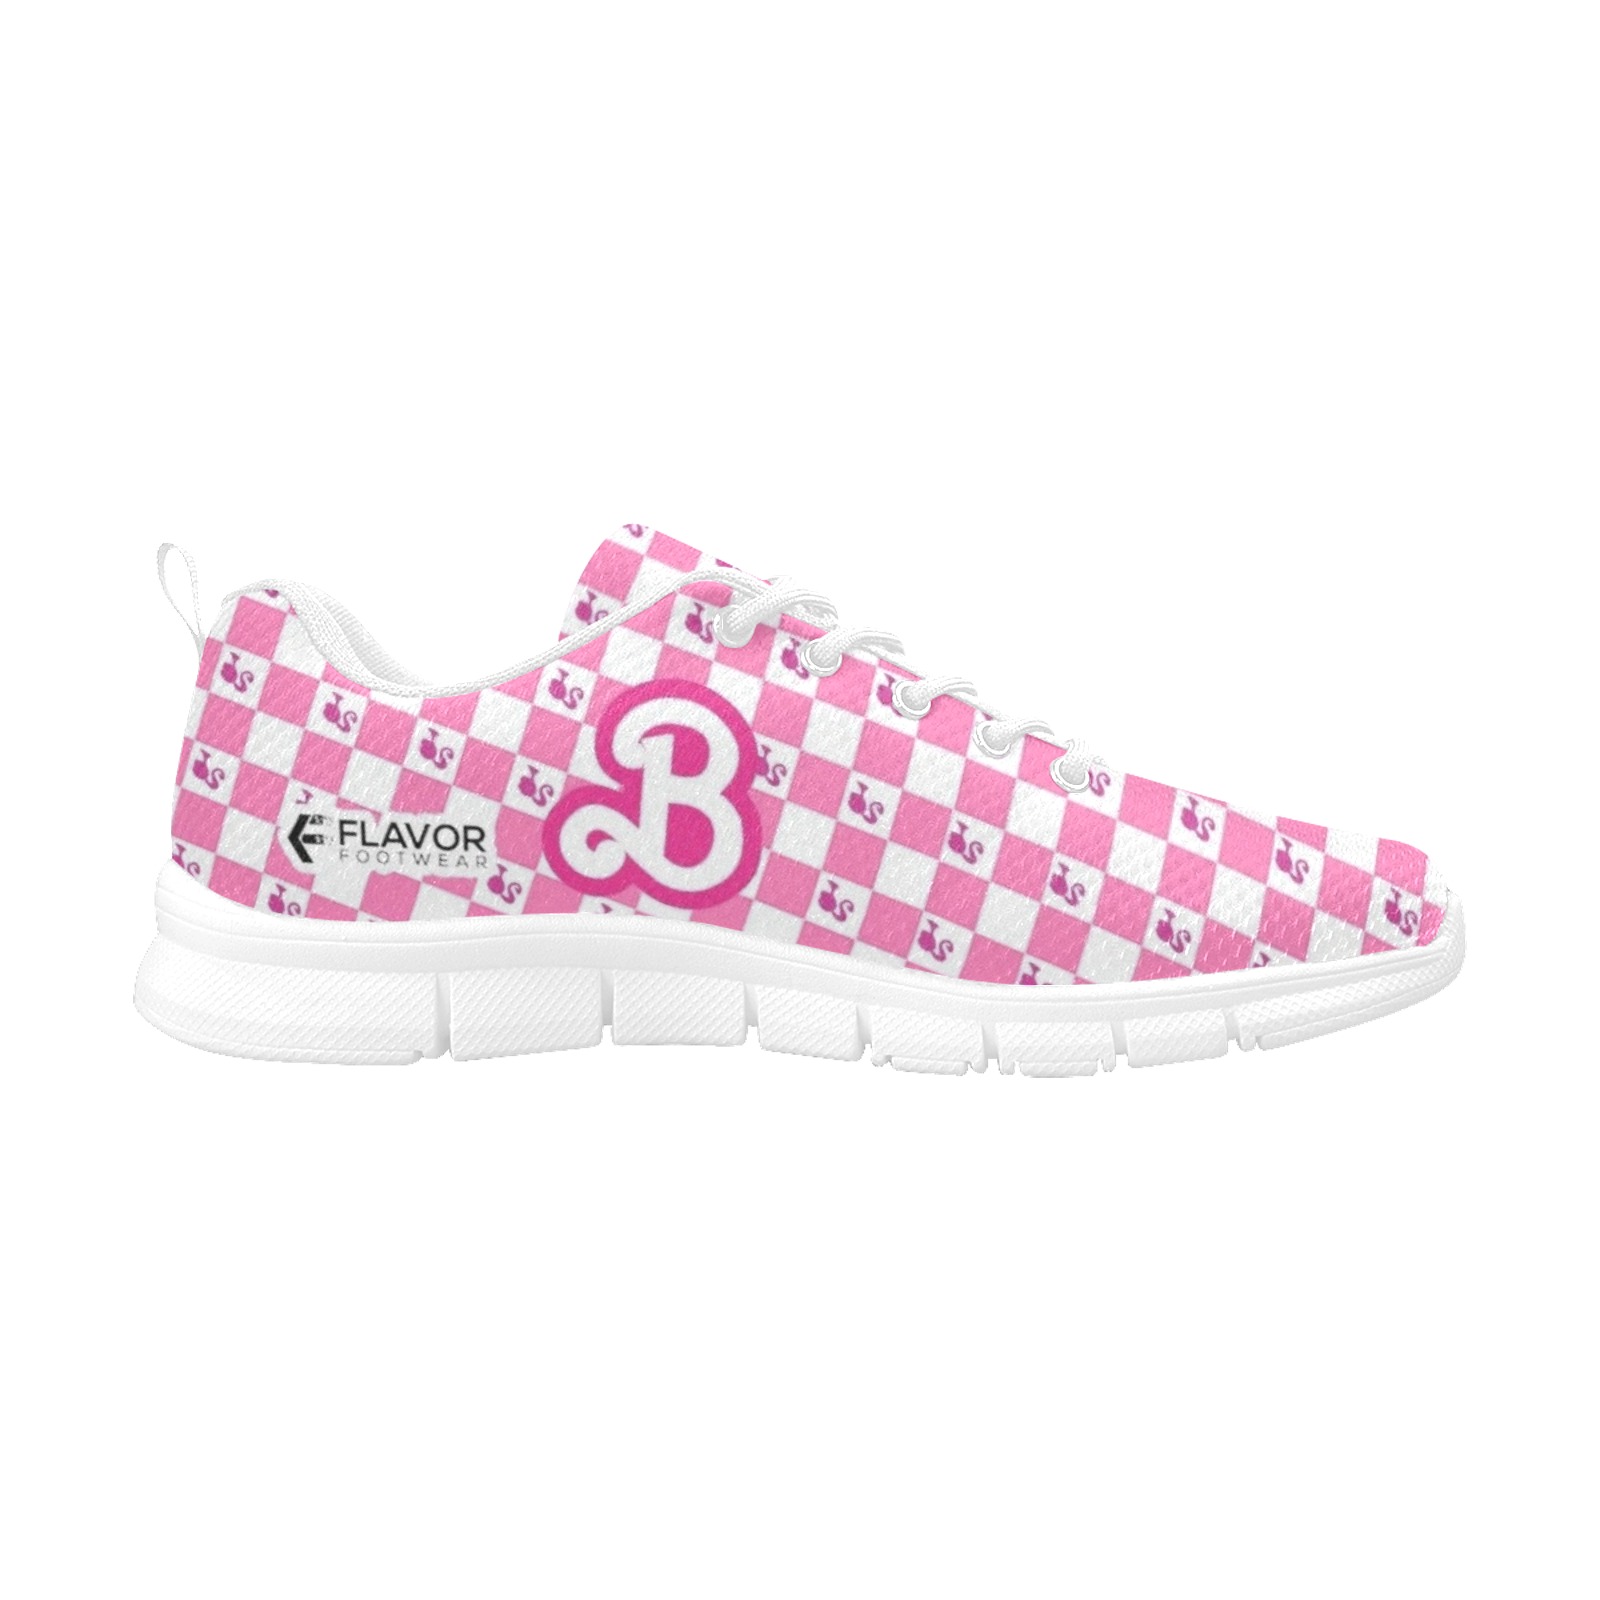 Bubblegum Pink Sneaker Collection 02 Women's Breathable Running Shoes (Model 055)